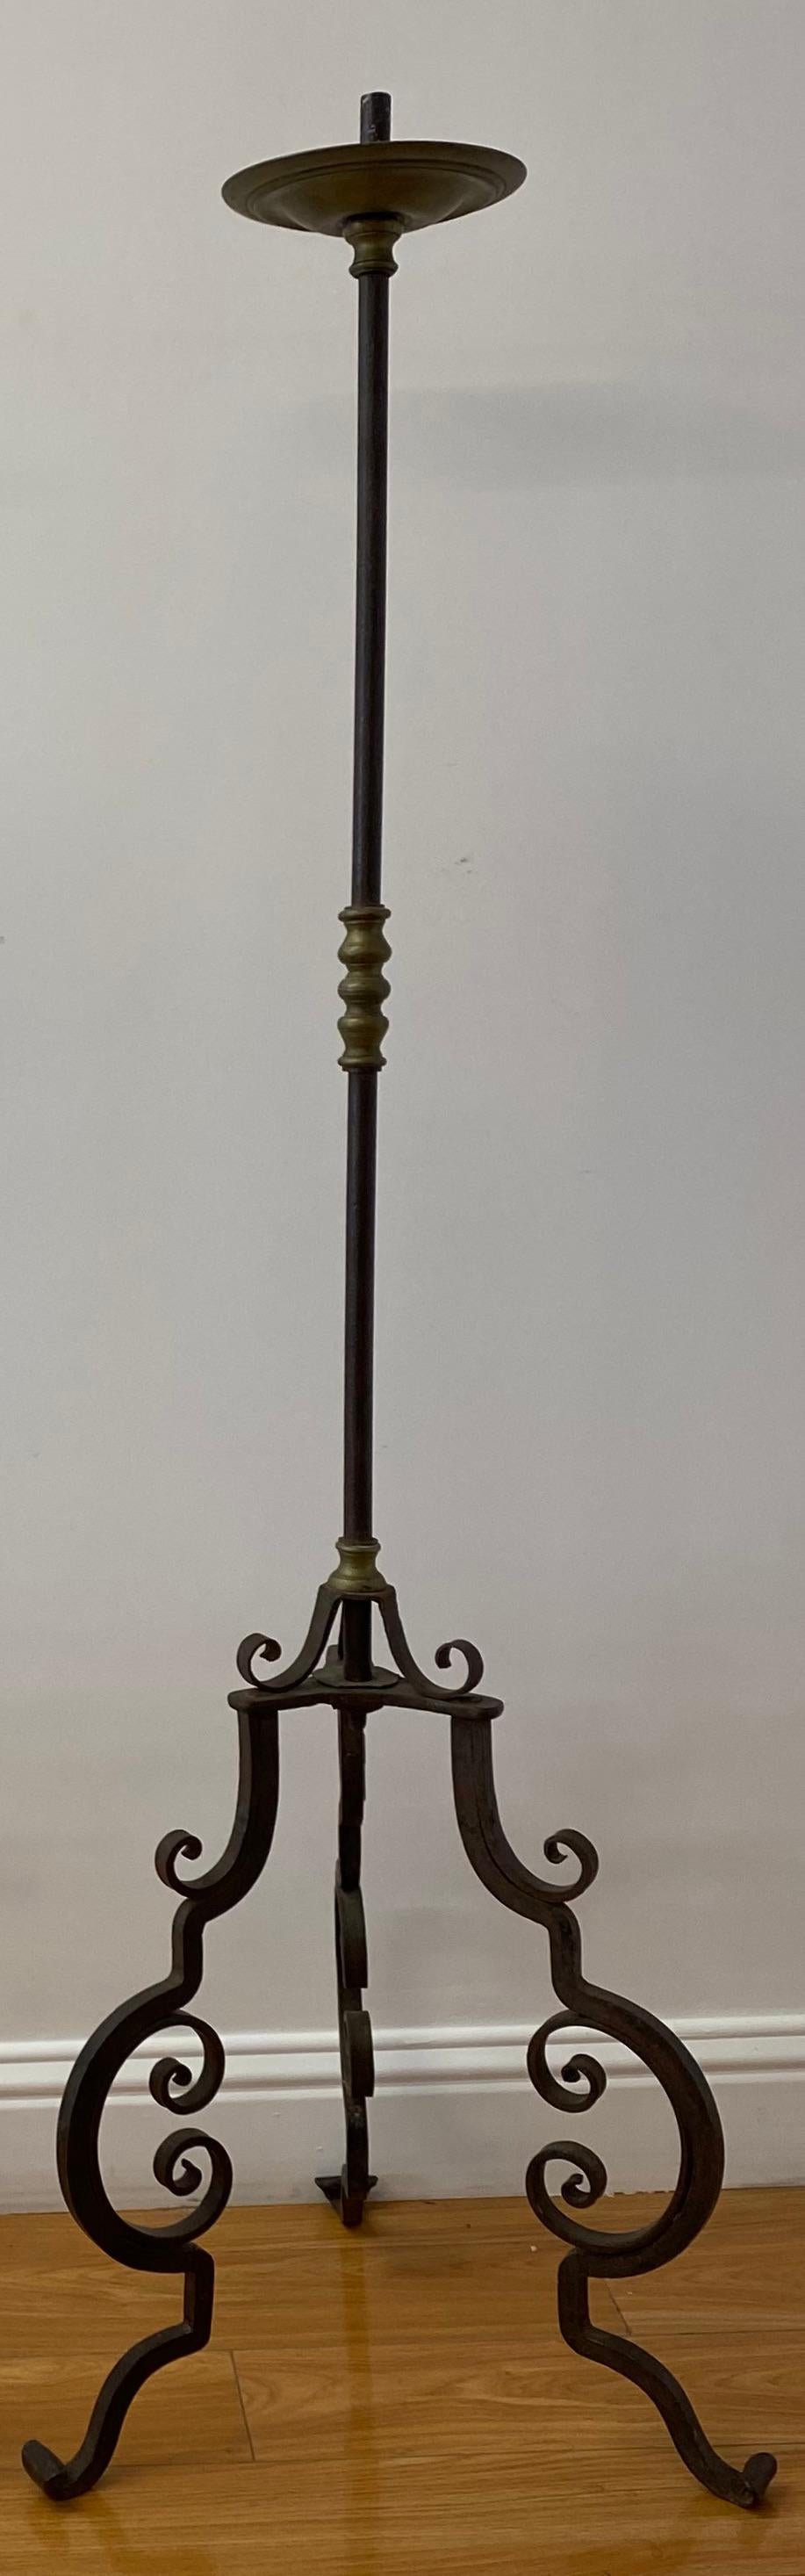 19th century wrought iron & brass torchère.

Measures: 19